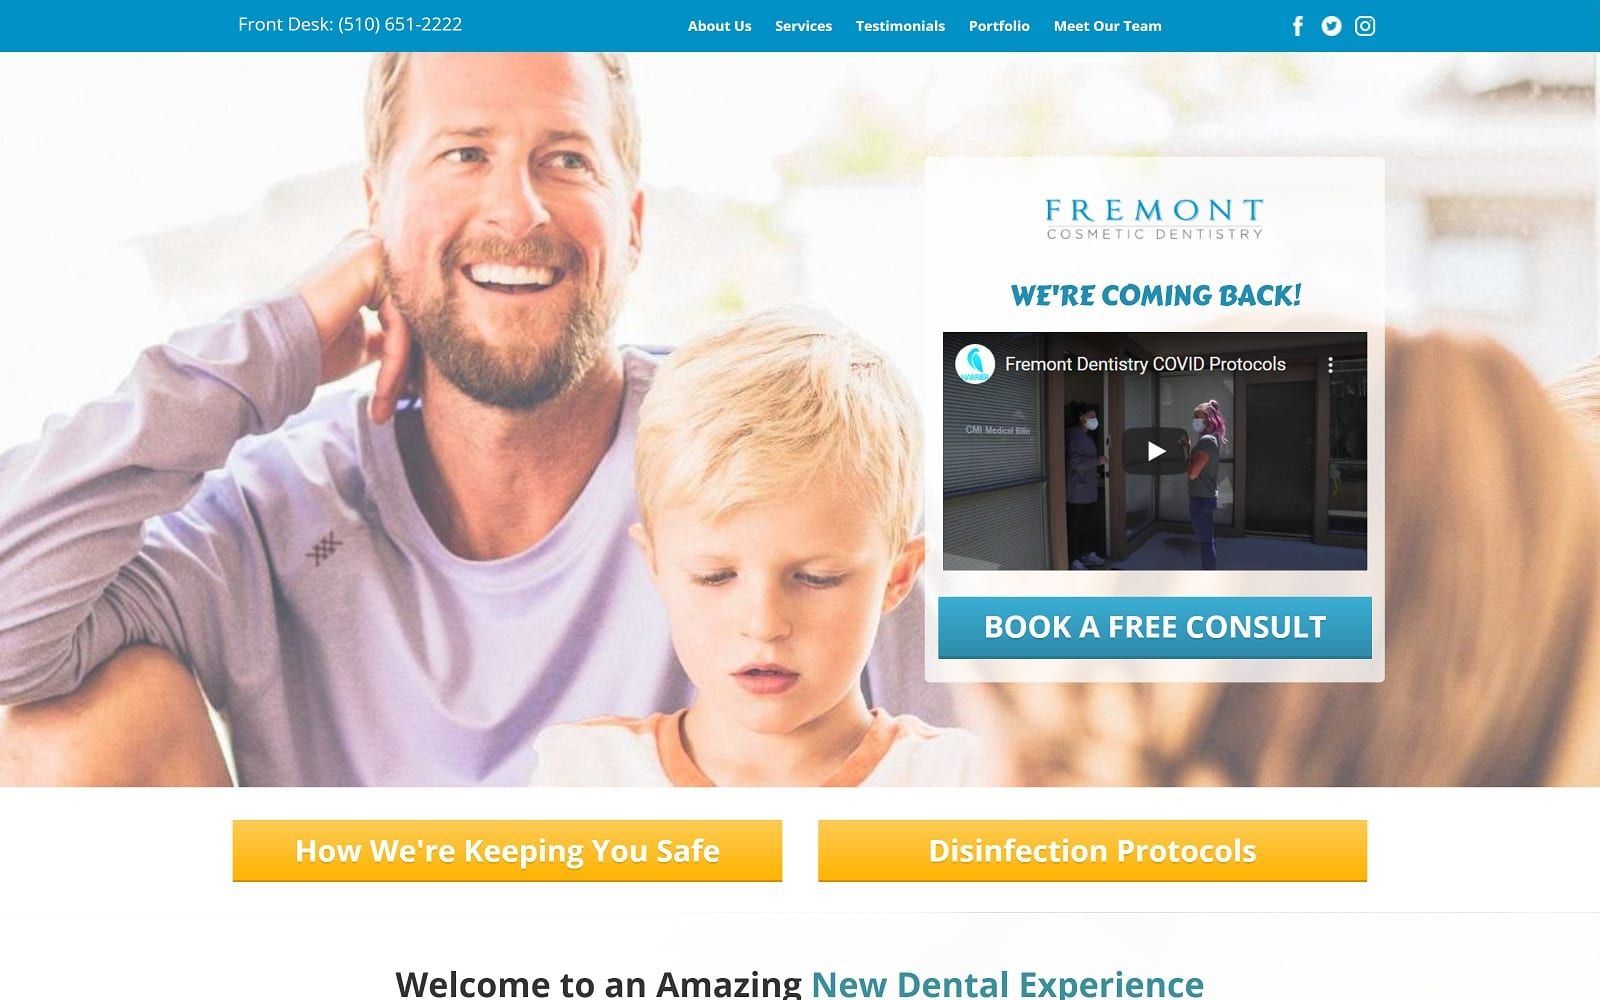 The screenshot of fremont cosmetic dentistry fremontcosmeticdentistry. Com website